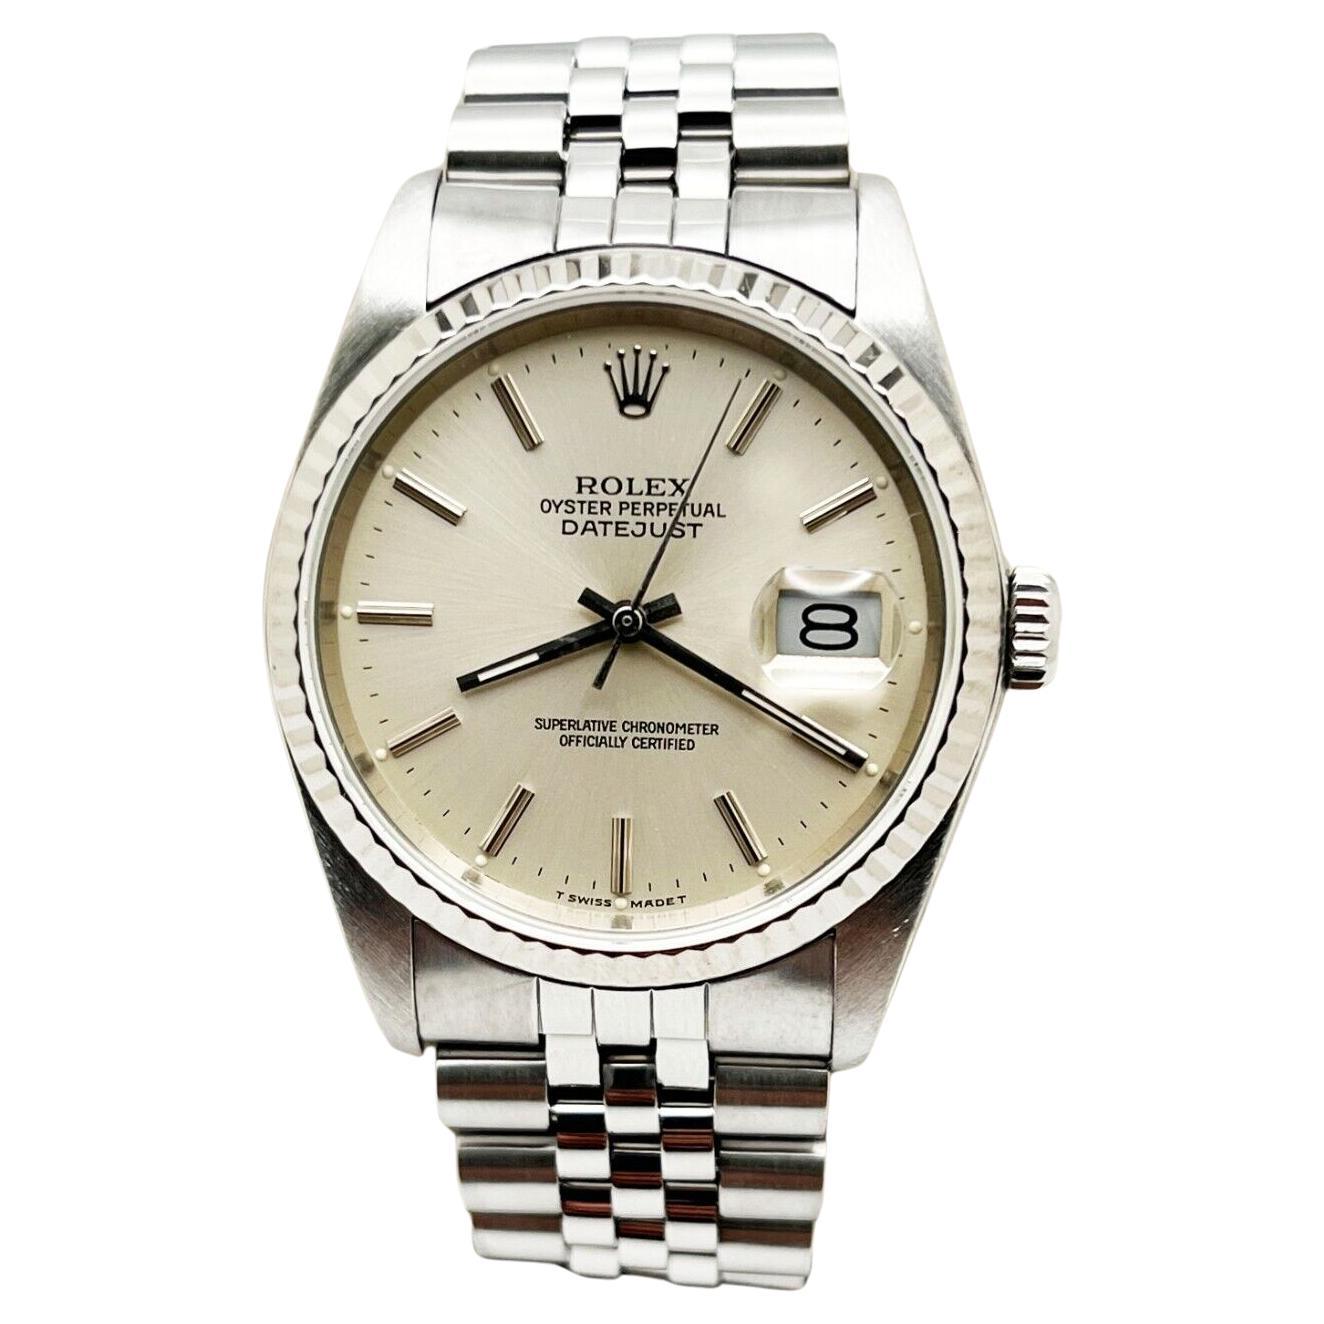 Rolex 16234 Datejust Silver Dial Stainless Steel